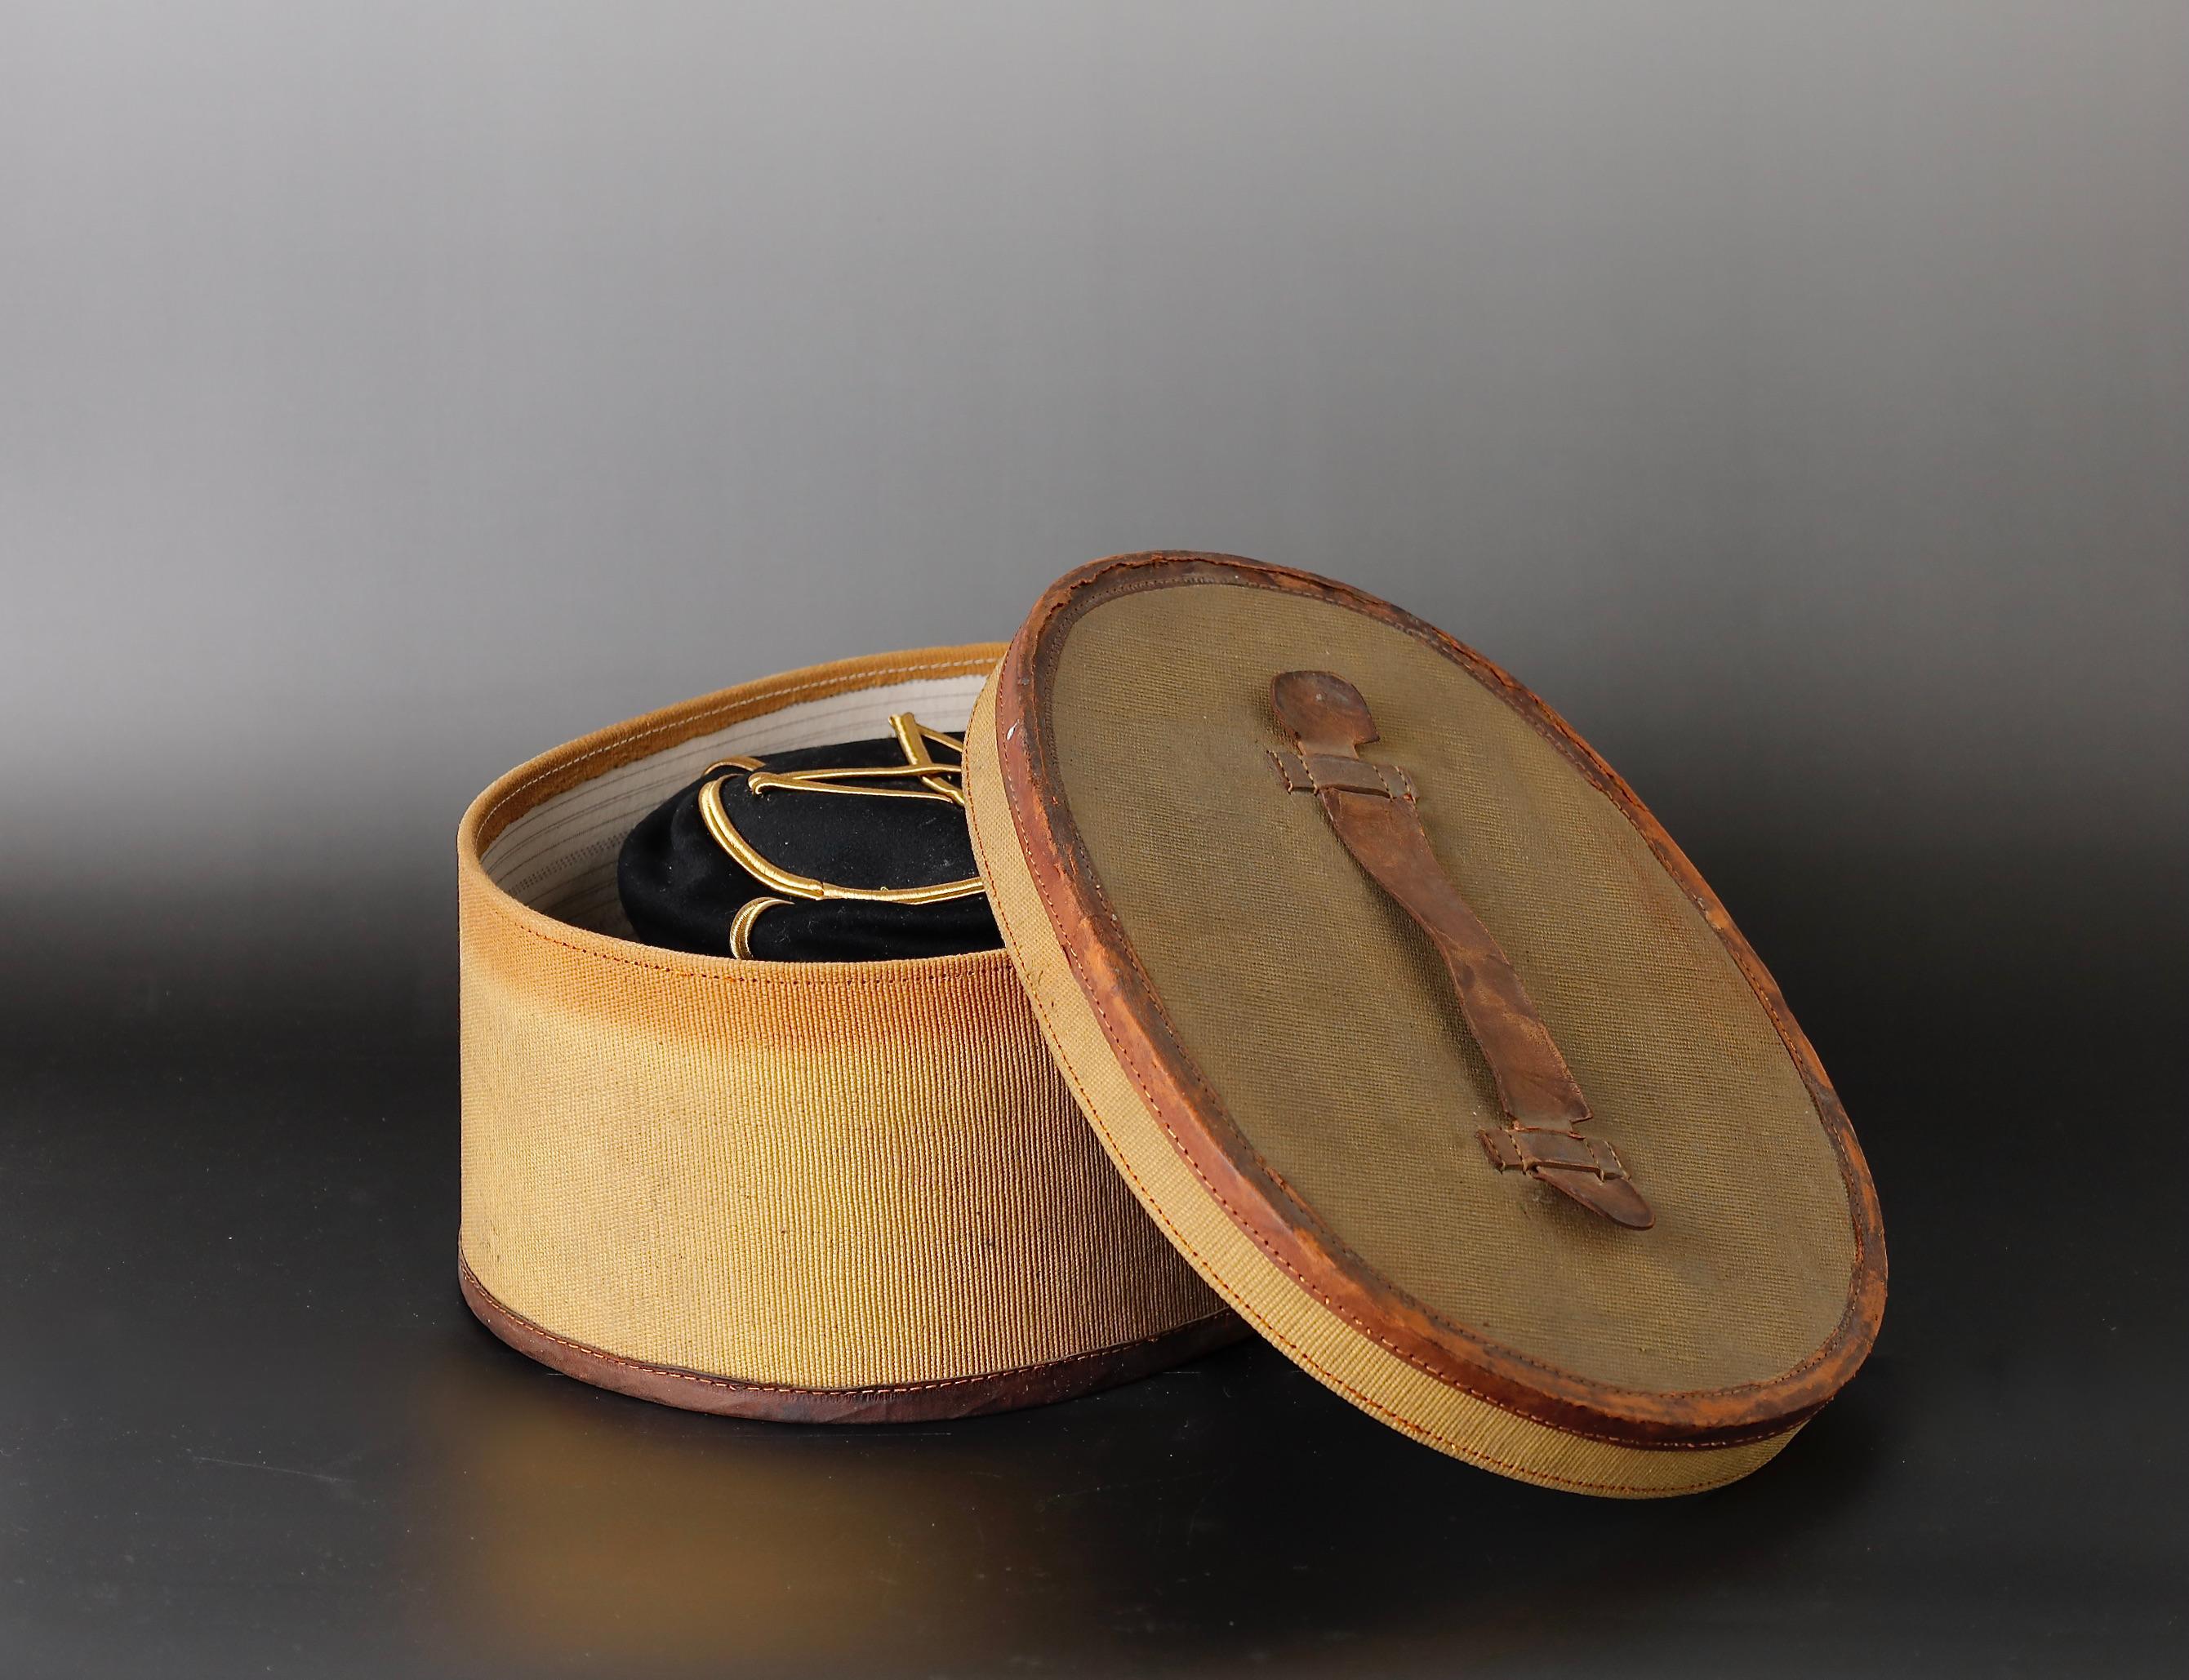 A Rare Japanese Imperial Army Officer Hat with Original Metal Box.

This rare Japanese Imperial Army officer hat is a stunning example of Japanese military history. It is dated to the early 20th century and is in very good condition with some